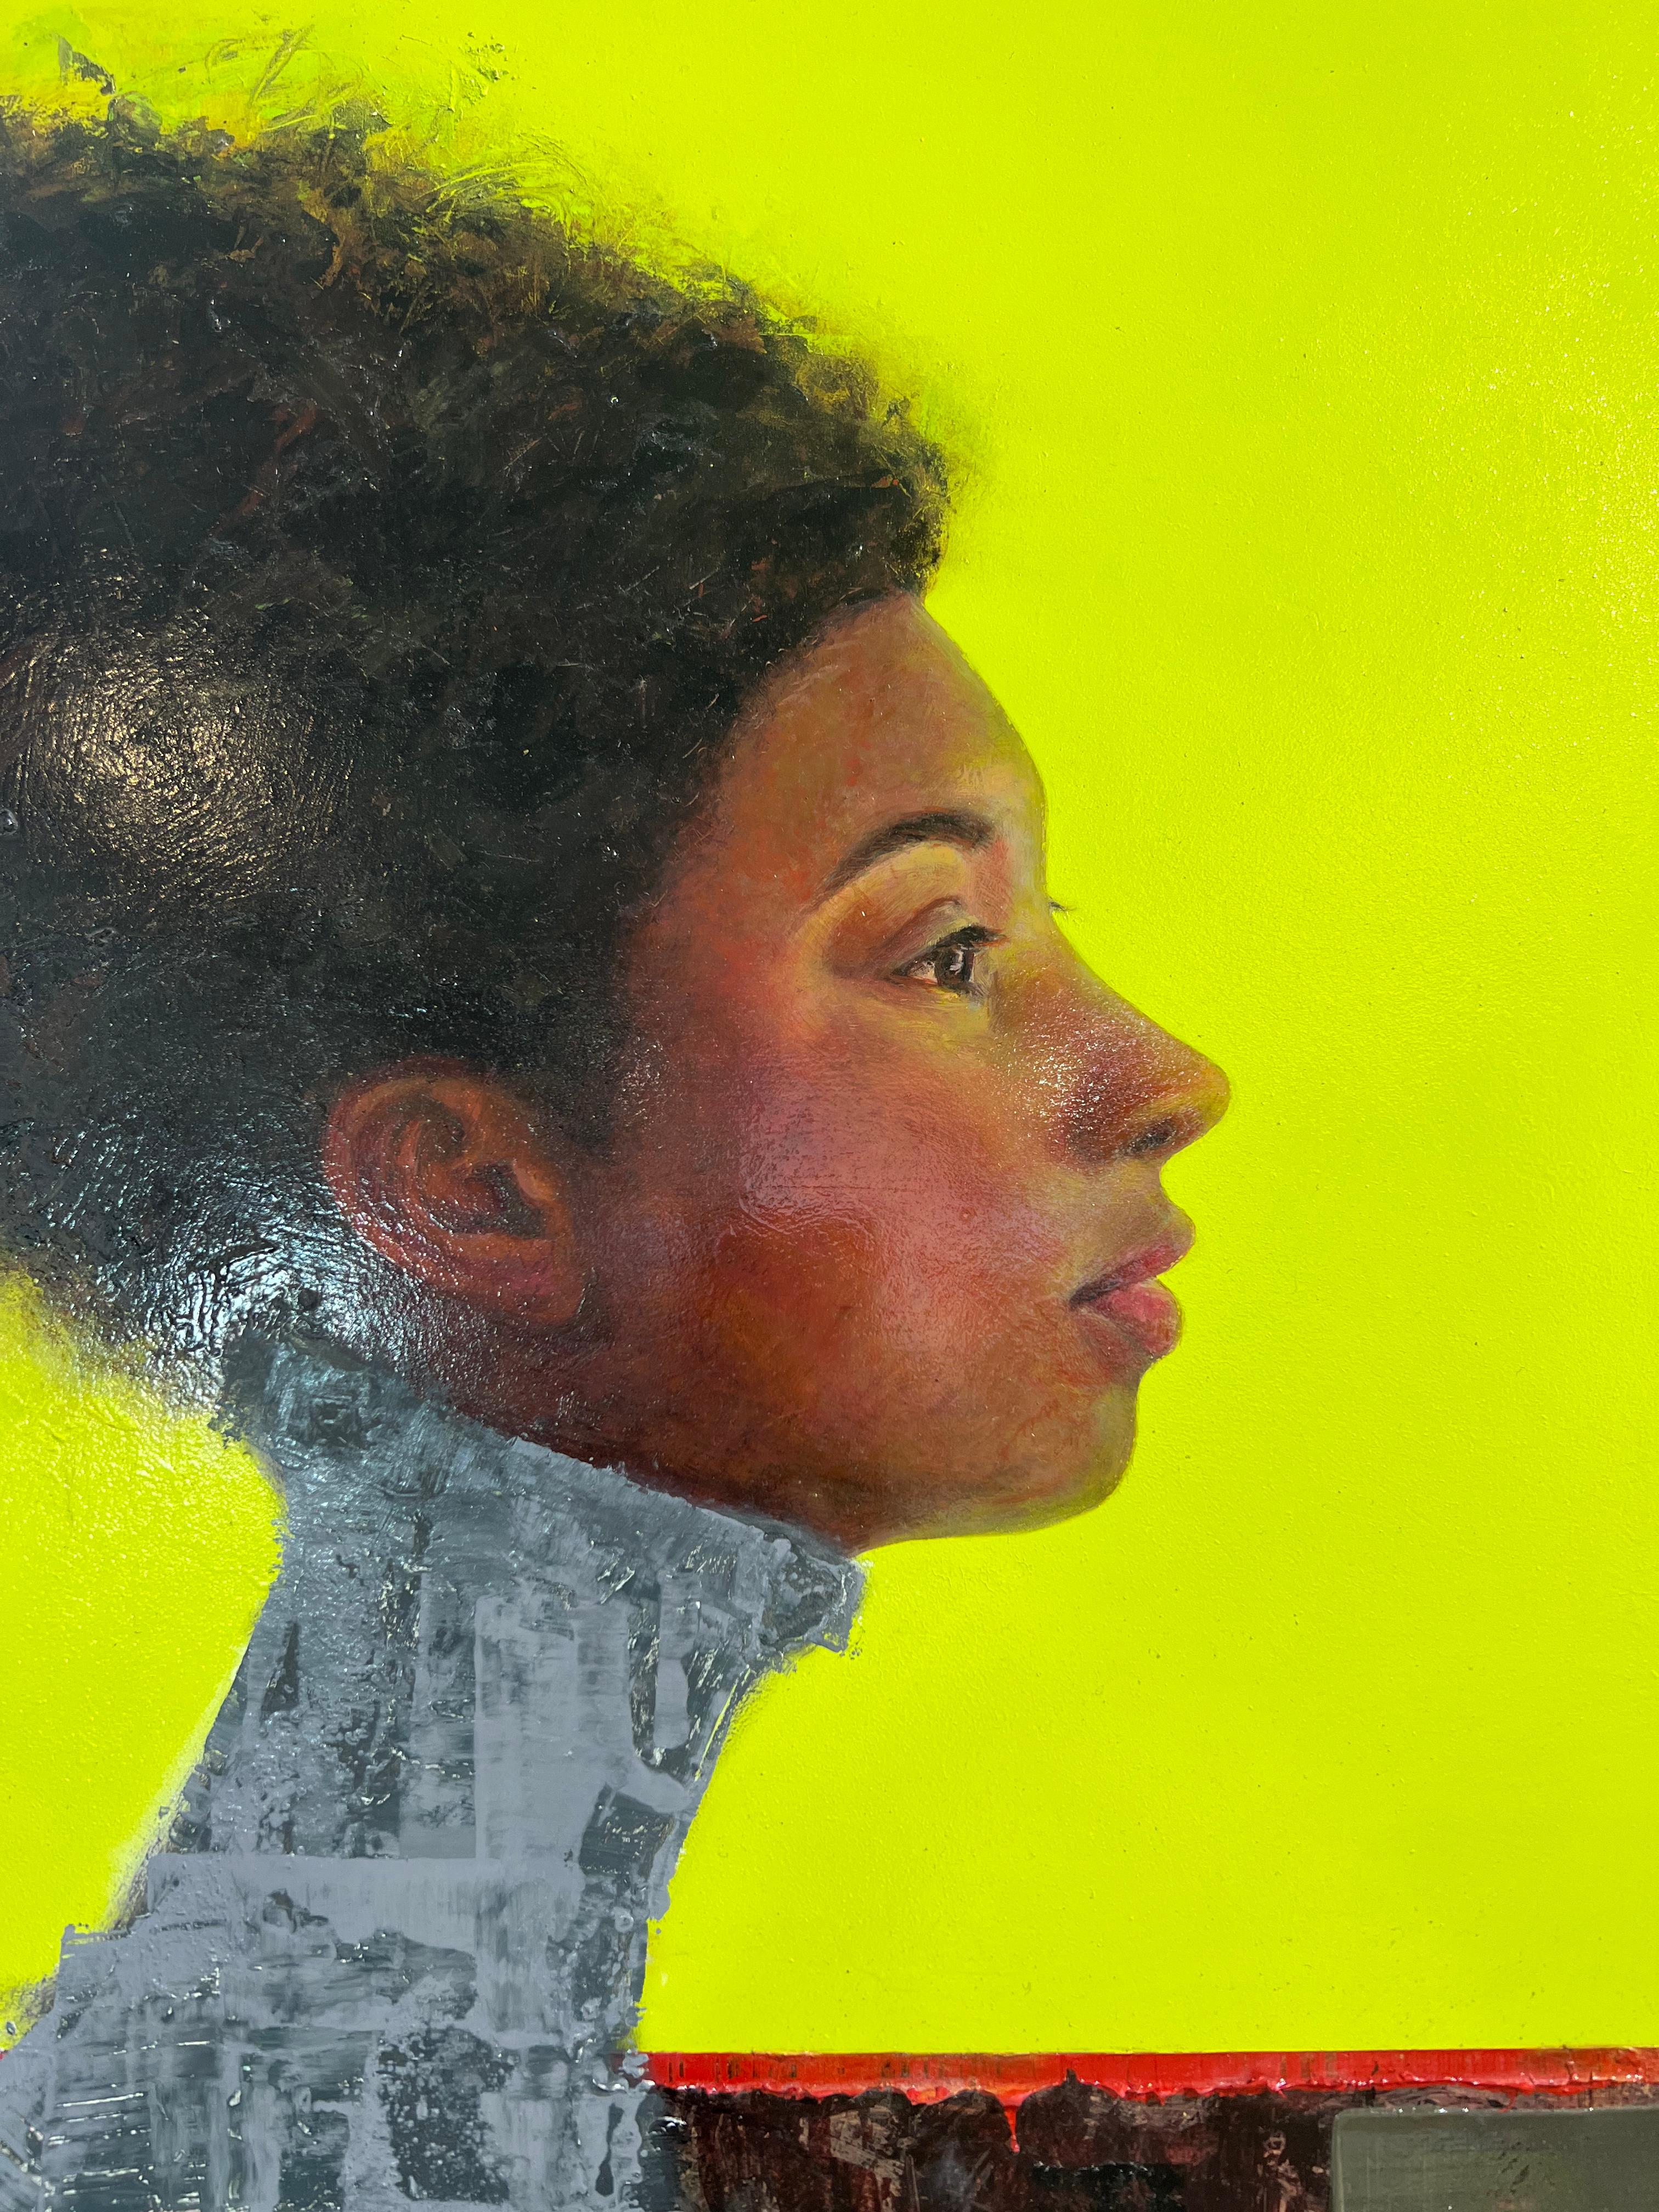 This abstract portrait by Ned Martin is made with oil paint on panel. Part of his Spirits Through Time series, it features a woman in profile - her face and hair are rendered realistically while her neck and shoulders, and the background of the